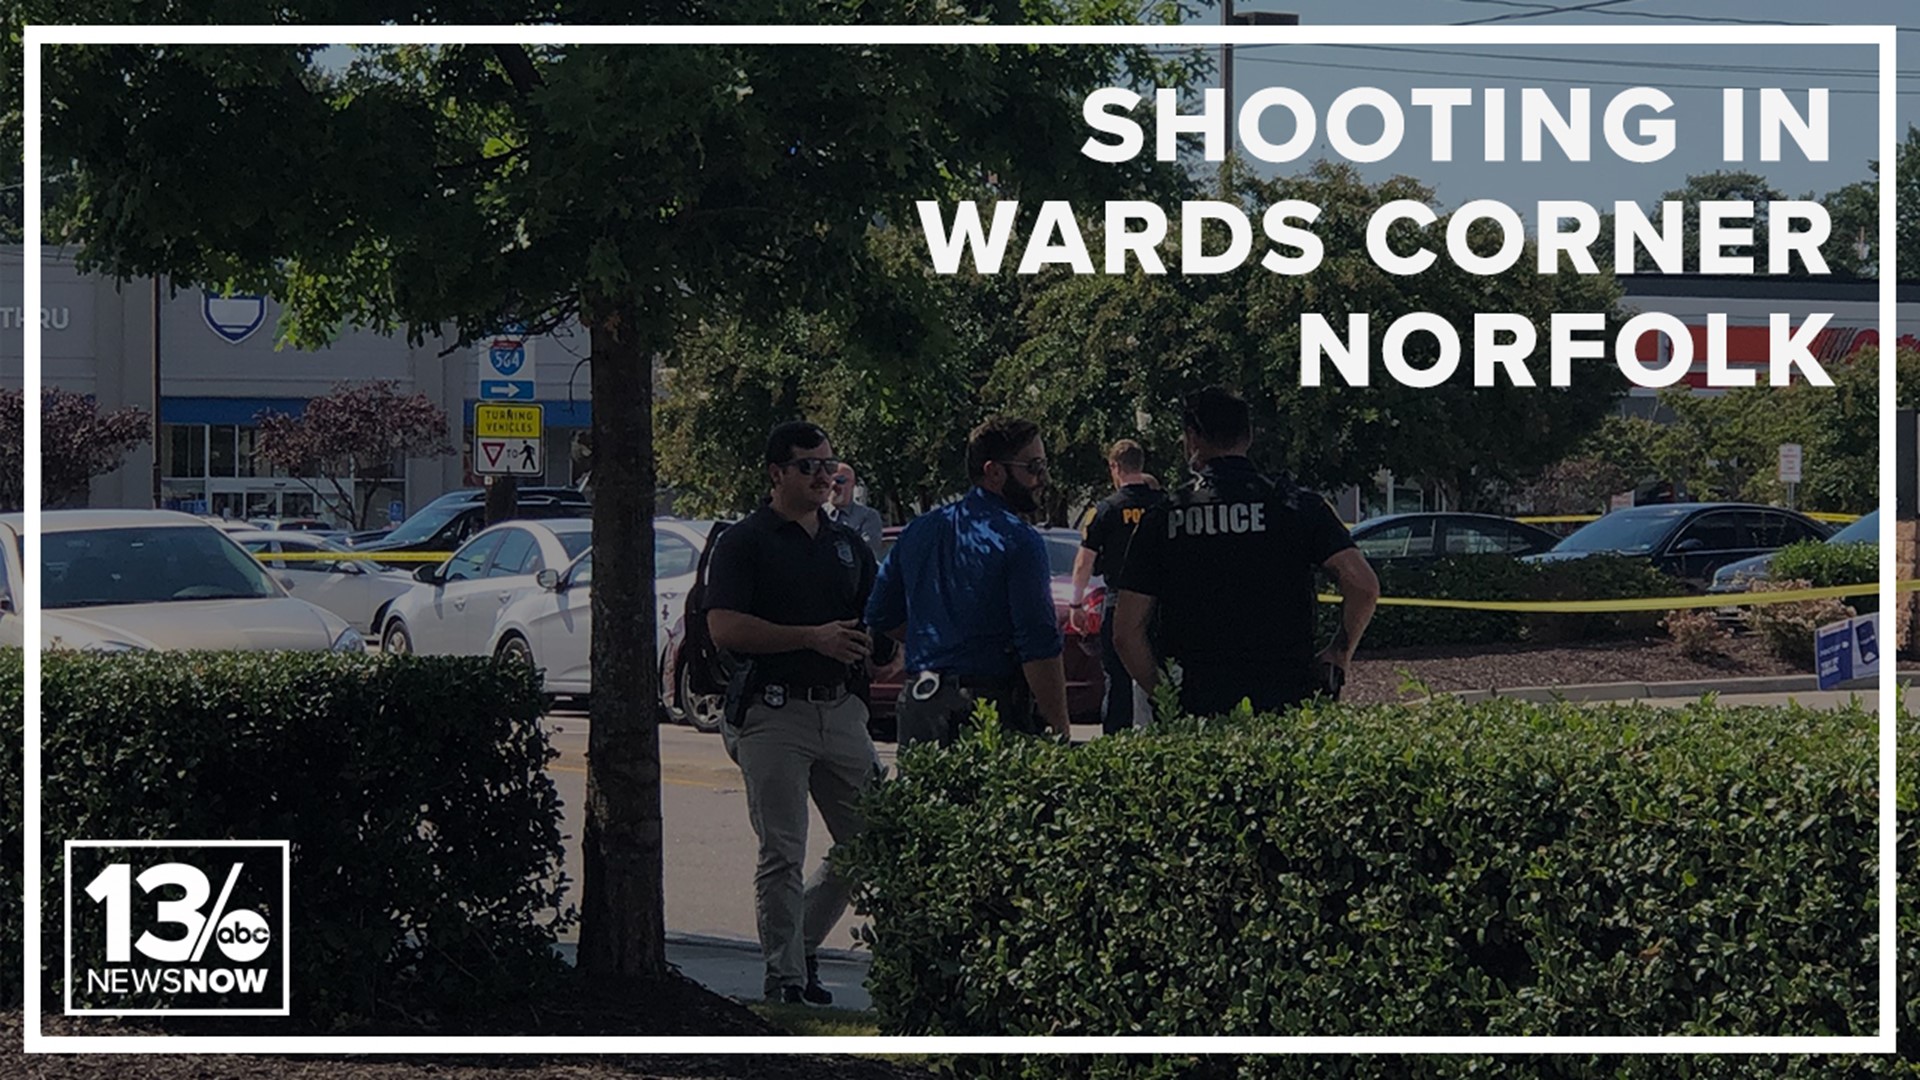 The shooting happened at the intersection of East Little Creek Road and Granby Street in Norfolk, Virginia.